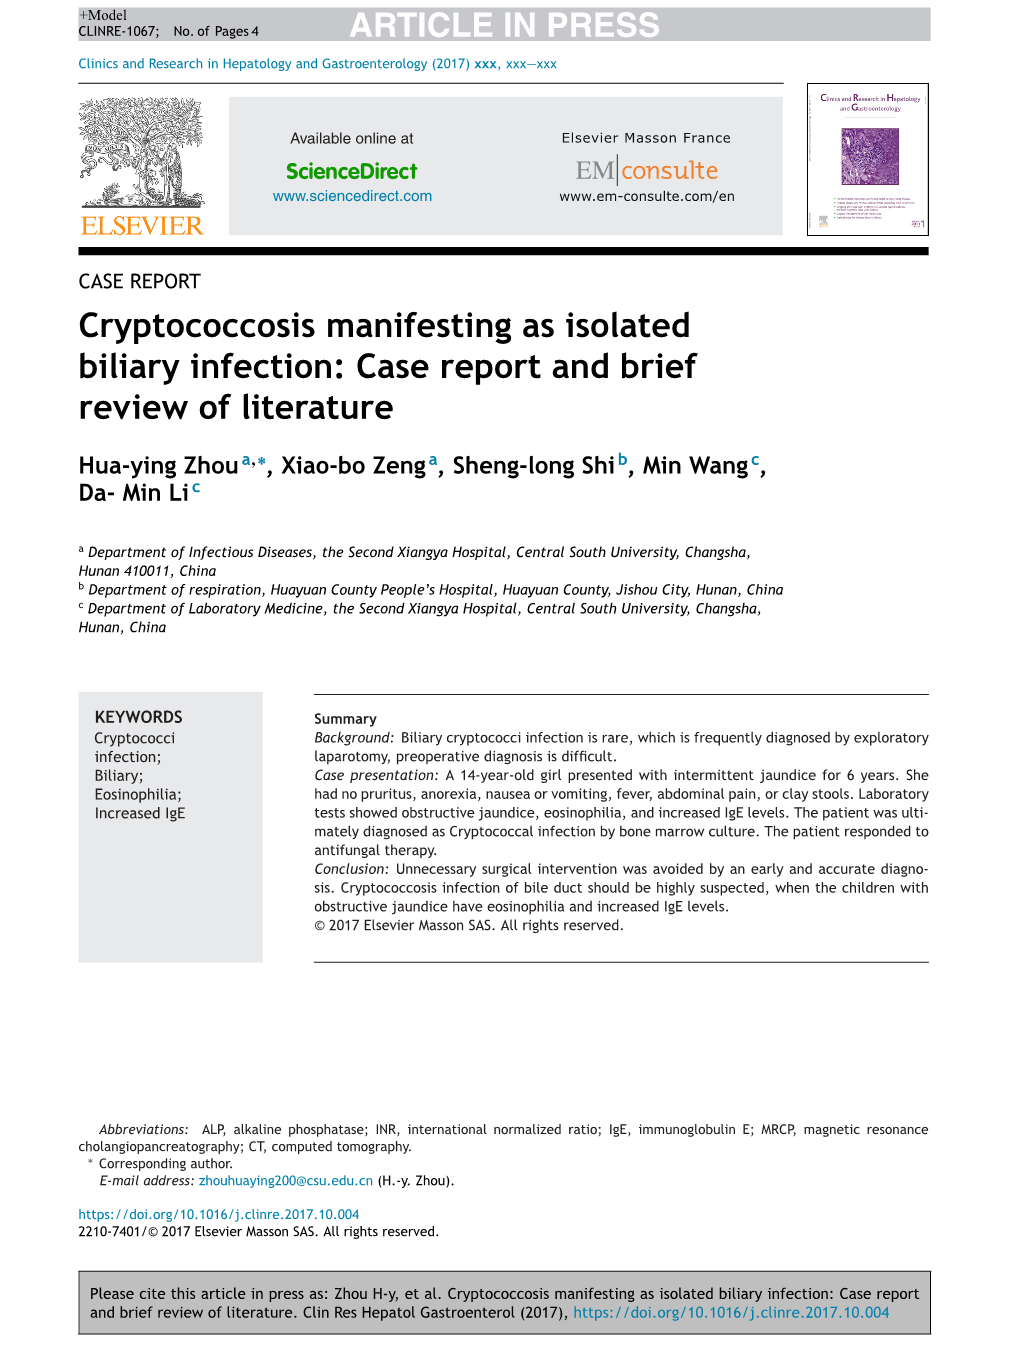 Cryptococcosis Manifesting As Isolated Biliary Infection: Case Report